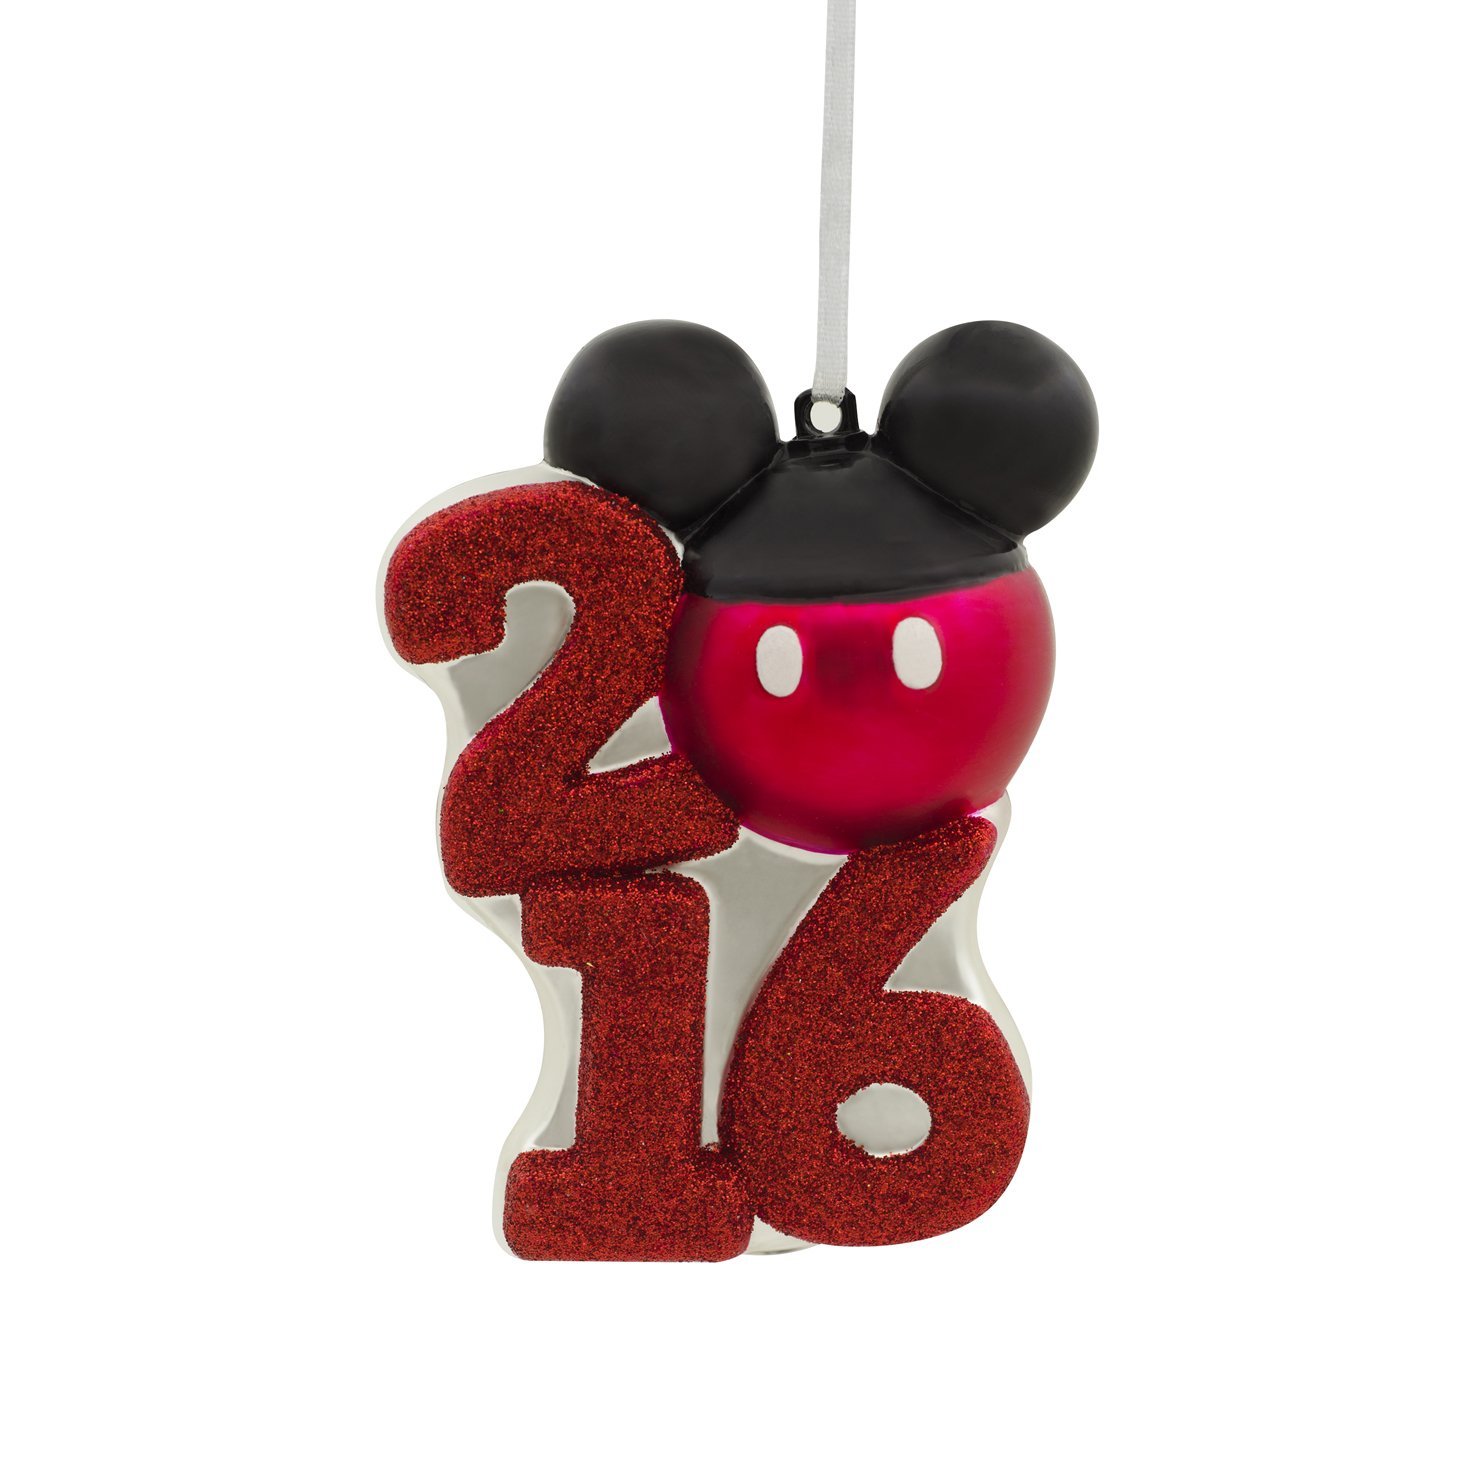 Trim Your Disney Christmas Tree with a Dated Mickey Ornament